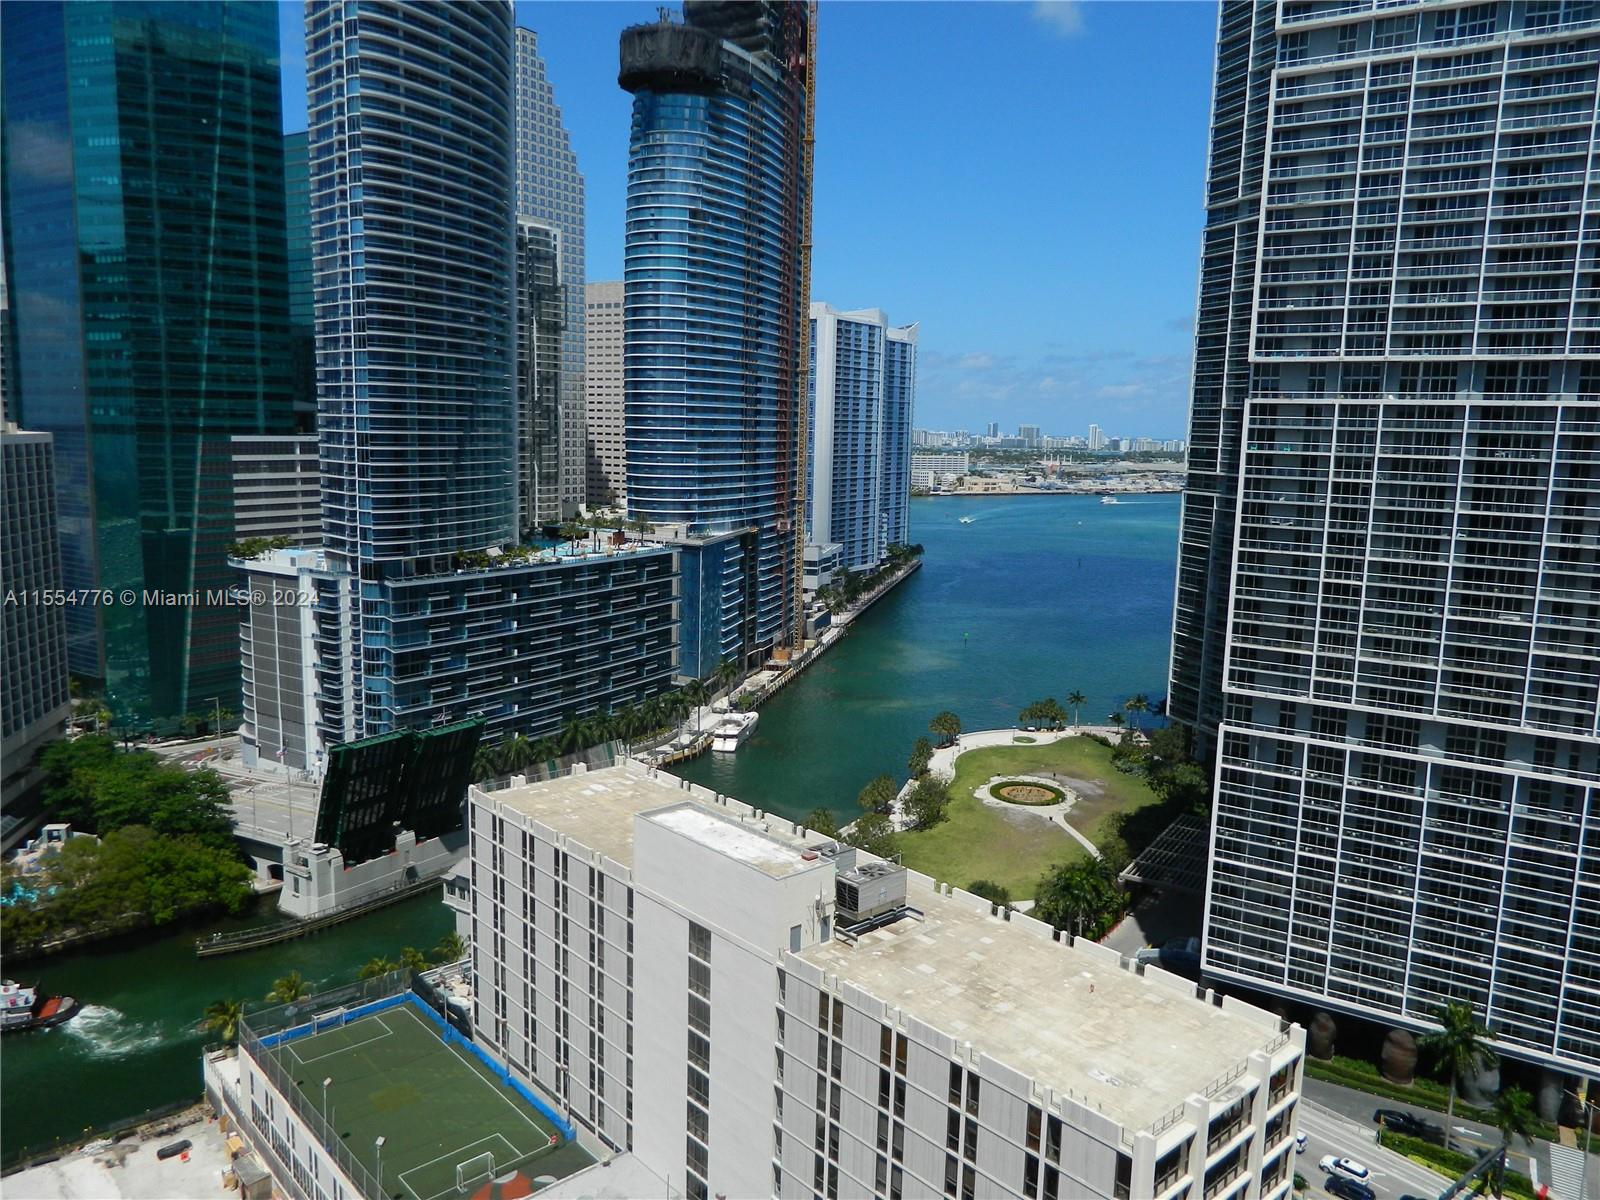 Beautiful unit with amazing views of Miami, Miami River and the Bay. 2 Blocks from Brickell City Centre, and few steps from Metro-mover. Porcelain/tile floors, with big windows and plenty of light. Condo has lot's of amenities including Infinity Pool, Rooftop Pool, Fitness Center, Sauna, Steam Room, Billiards Room, Theater Room, 24-Hour Valet & Security. Located in the best area of Brickell just across the bridge from downtown and close to I-95 access. Short Term Rentals Allowed up to 12 Times a Year with a 30-Day Minimum